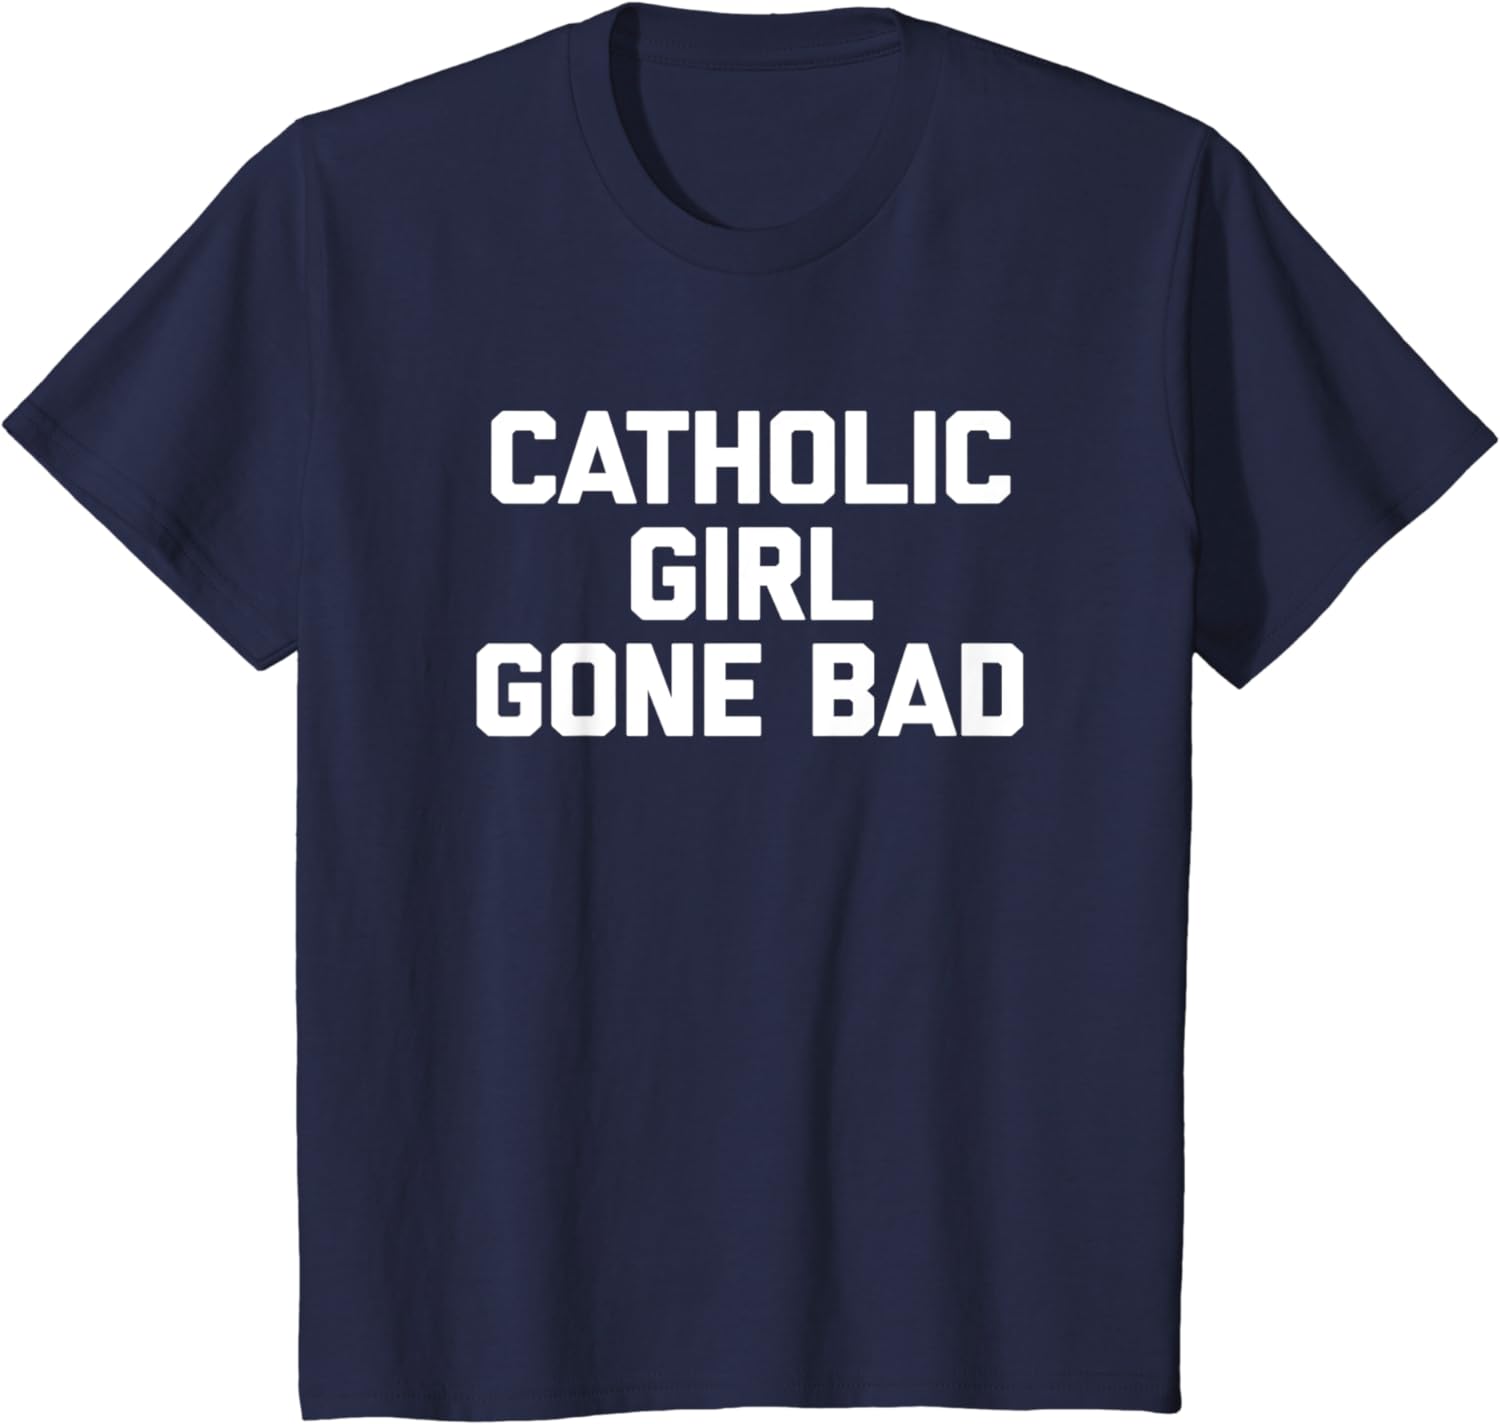 david sowell recommends Catholic Girls Gone Bad